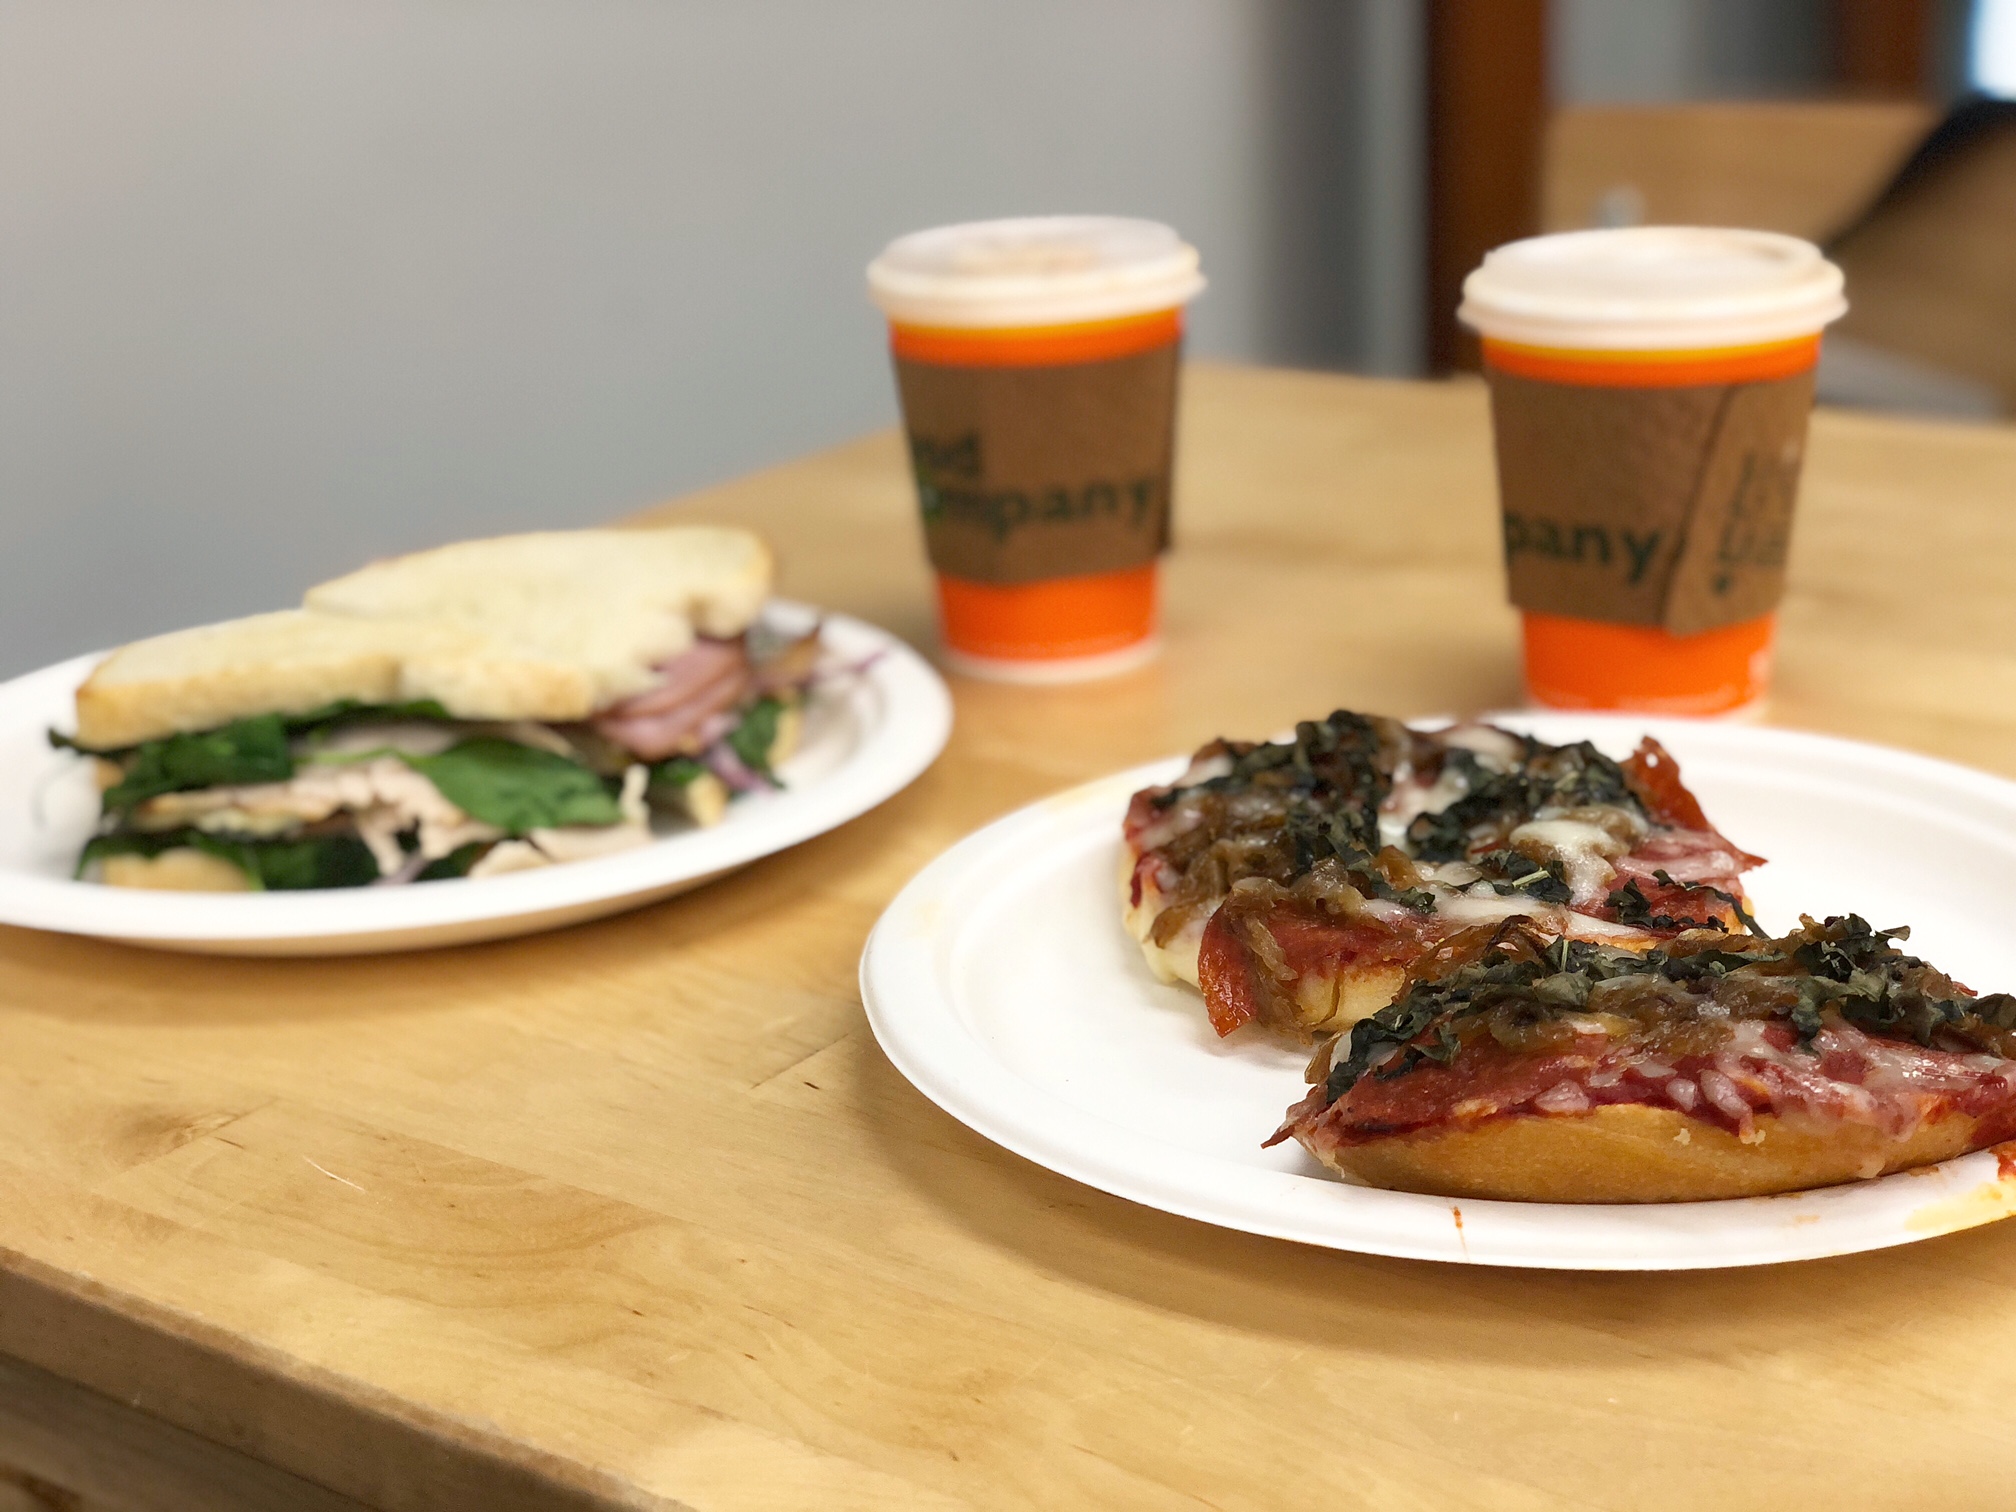 On a light wooden table, there is a sandwich on white bread cut diagonally in half and a pizza on another white plate. Behind the two plates are two hot coffee drinks in to go orange paper cups. Photo by Alyssa Buckley.